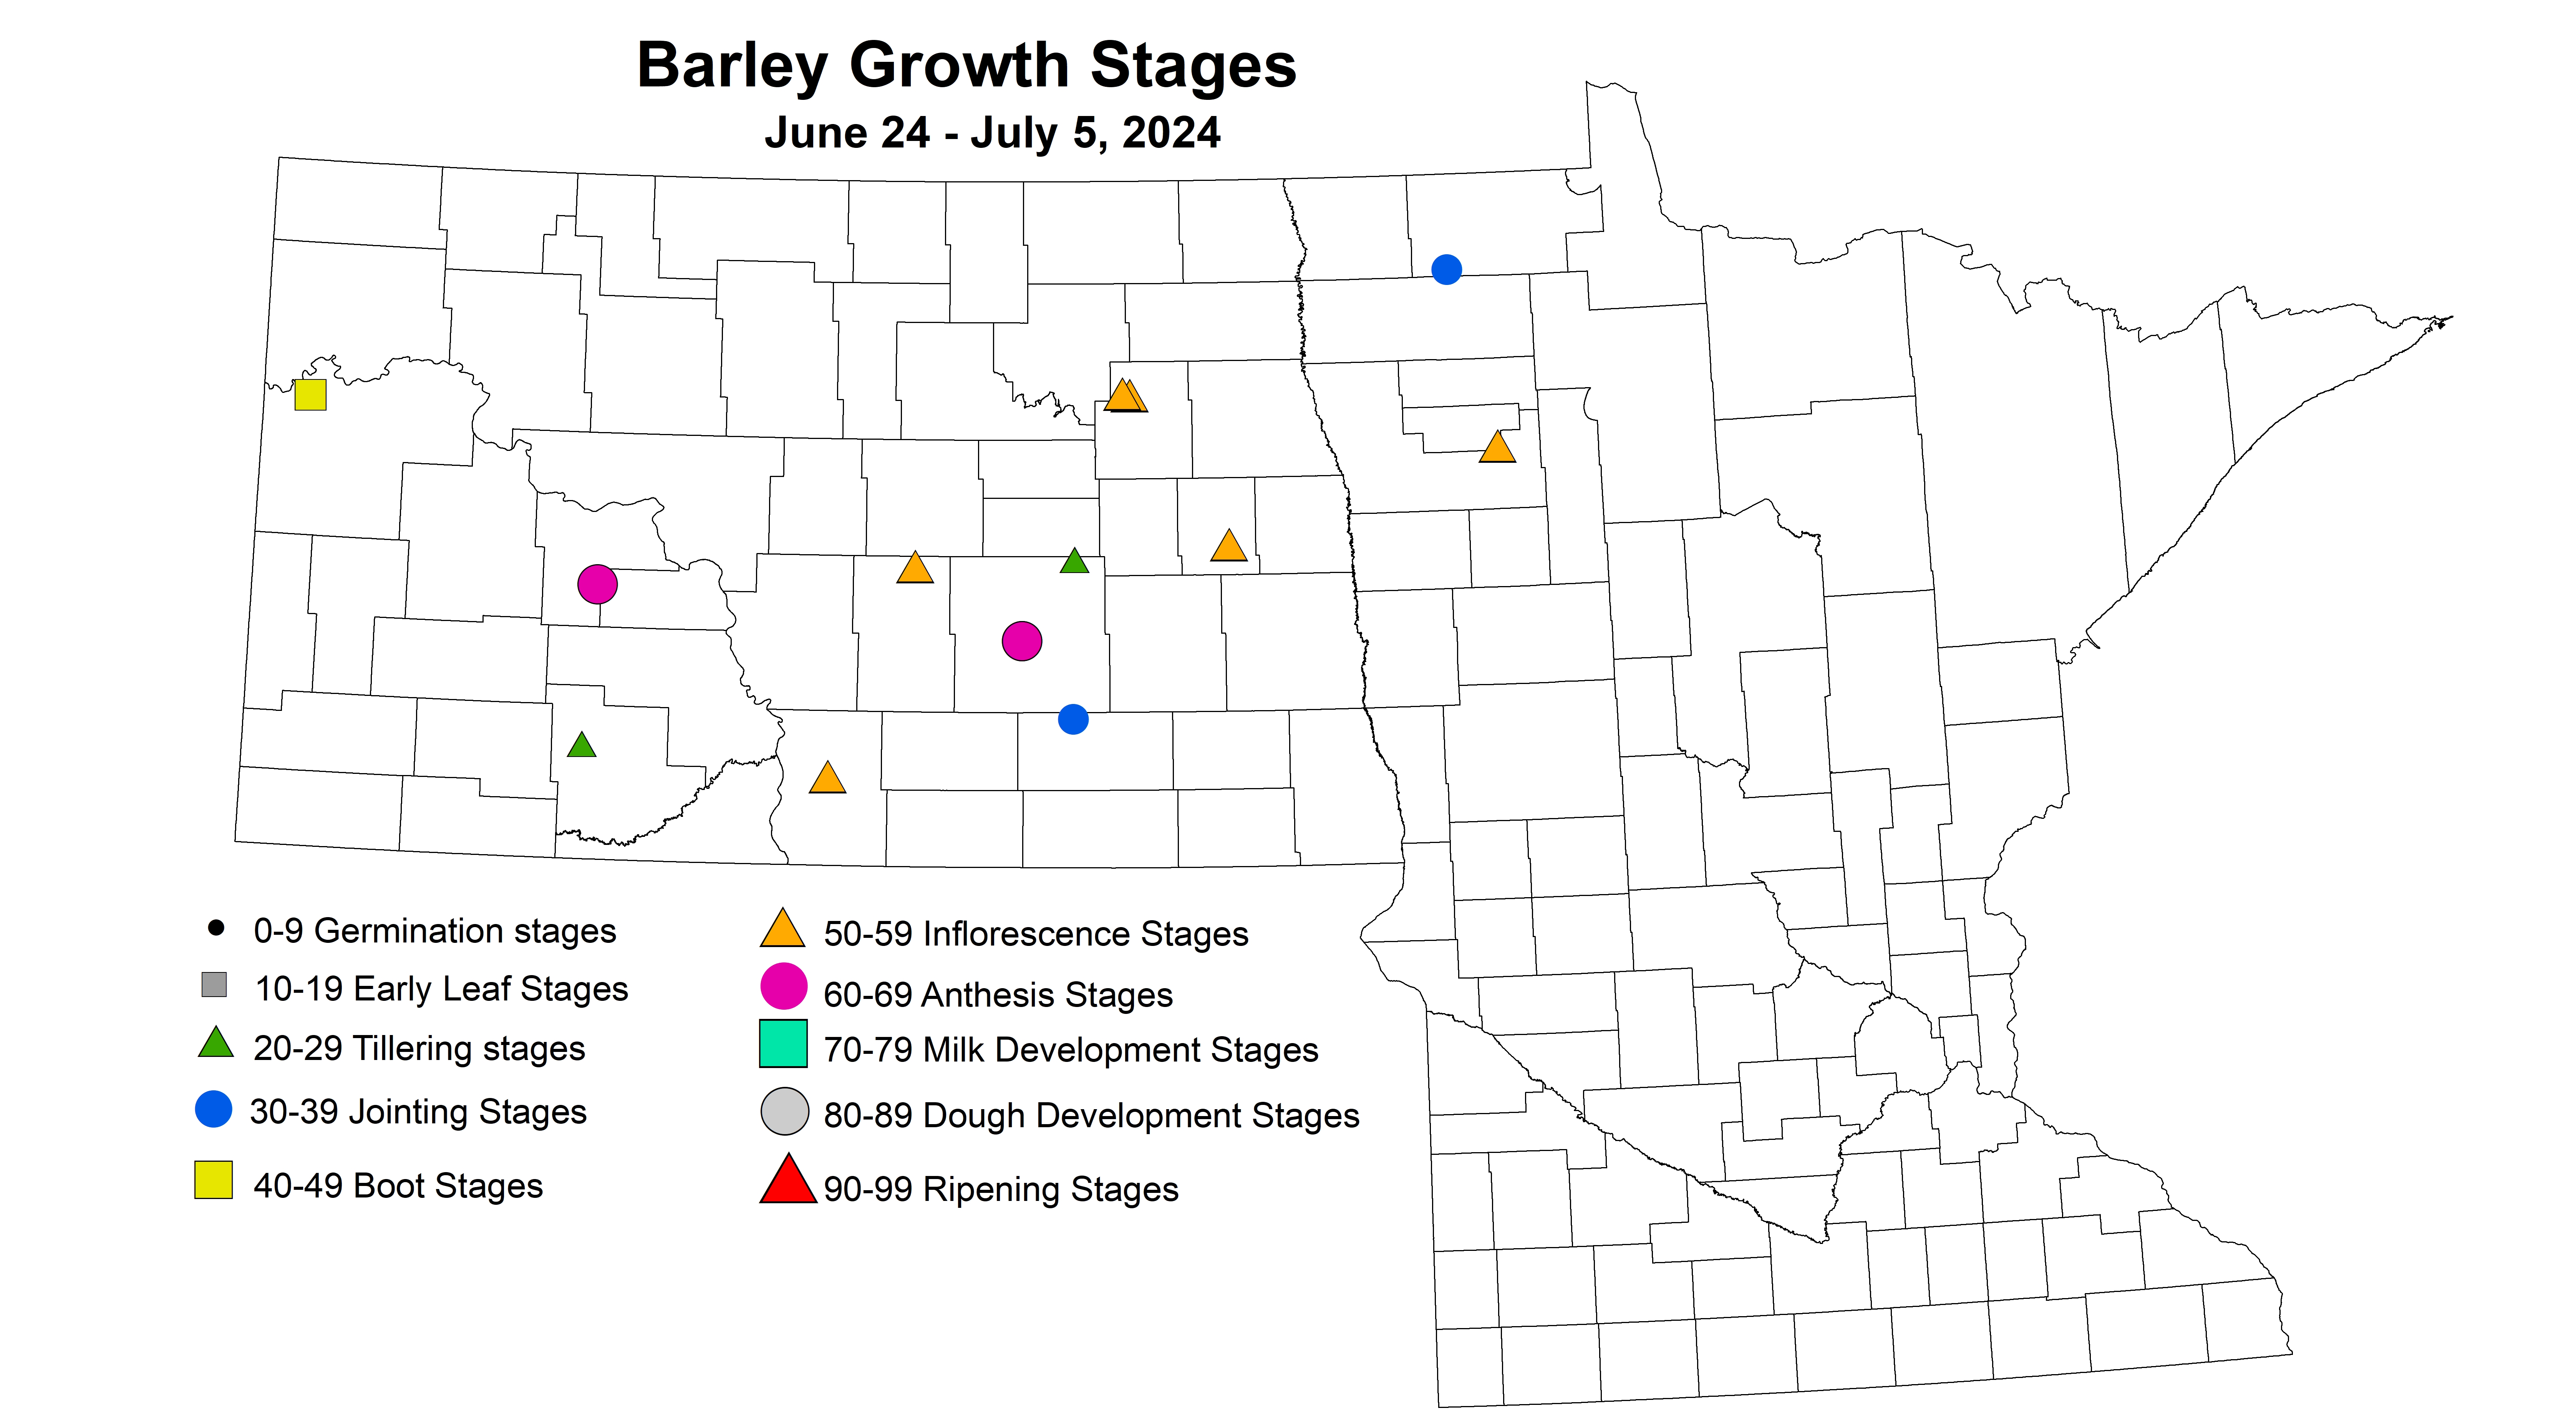 barley growth stages June 24 to July 5 2024